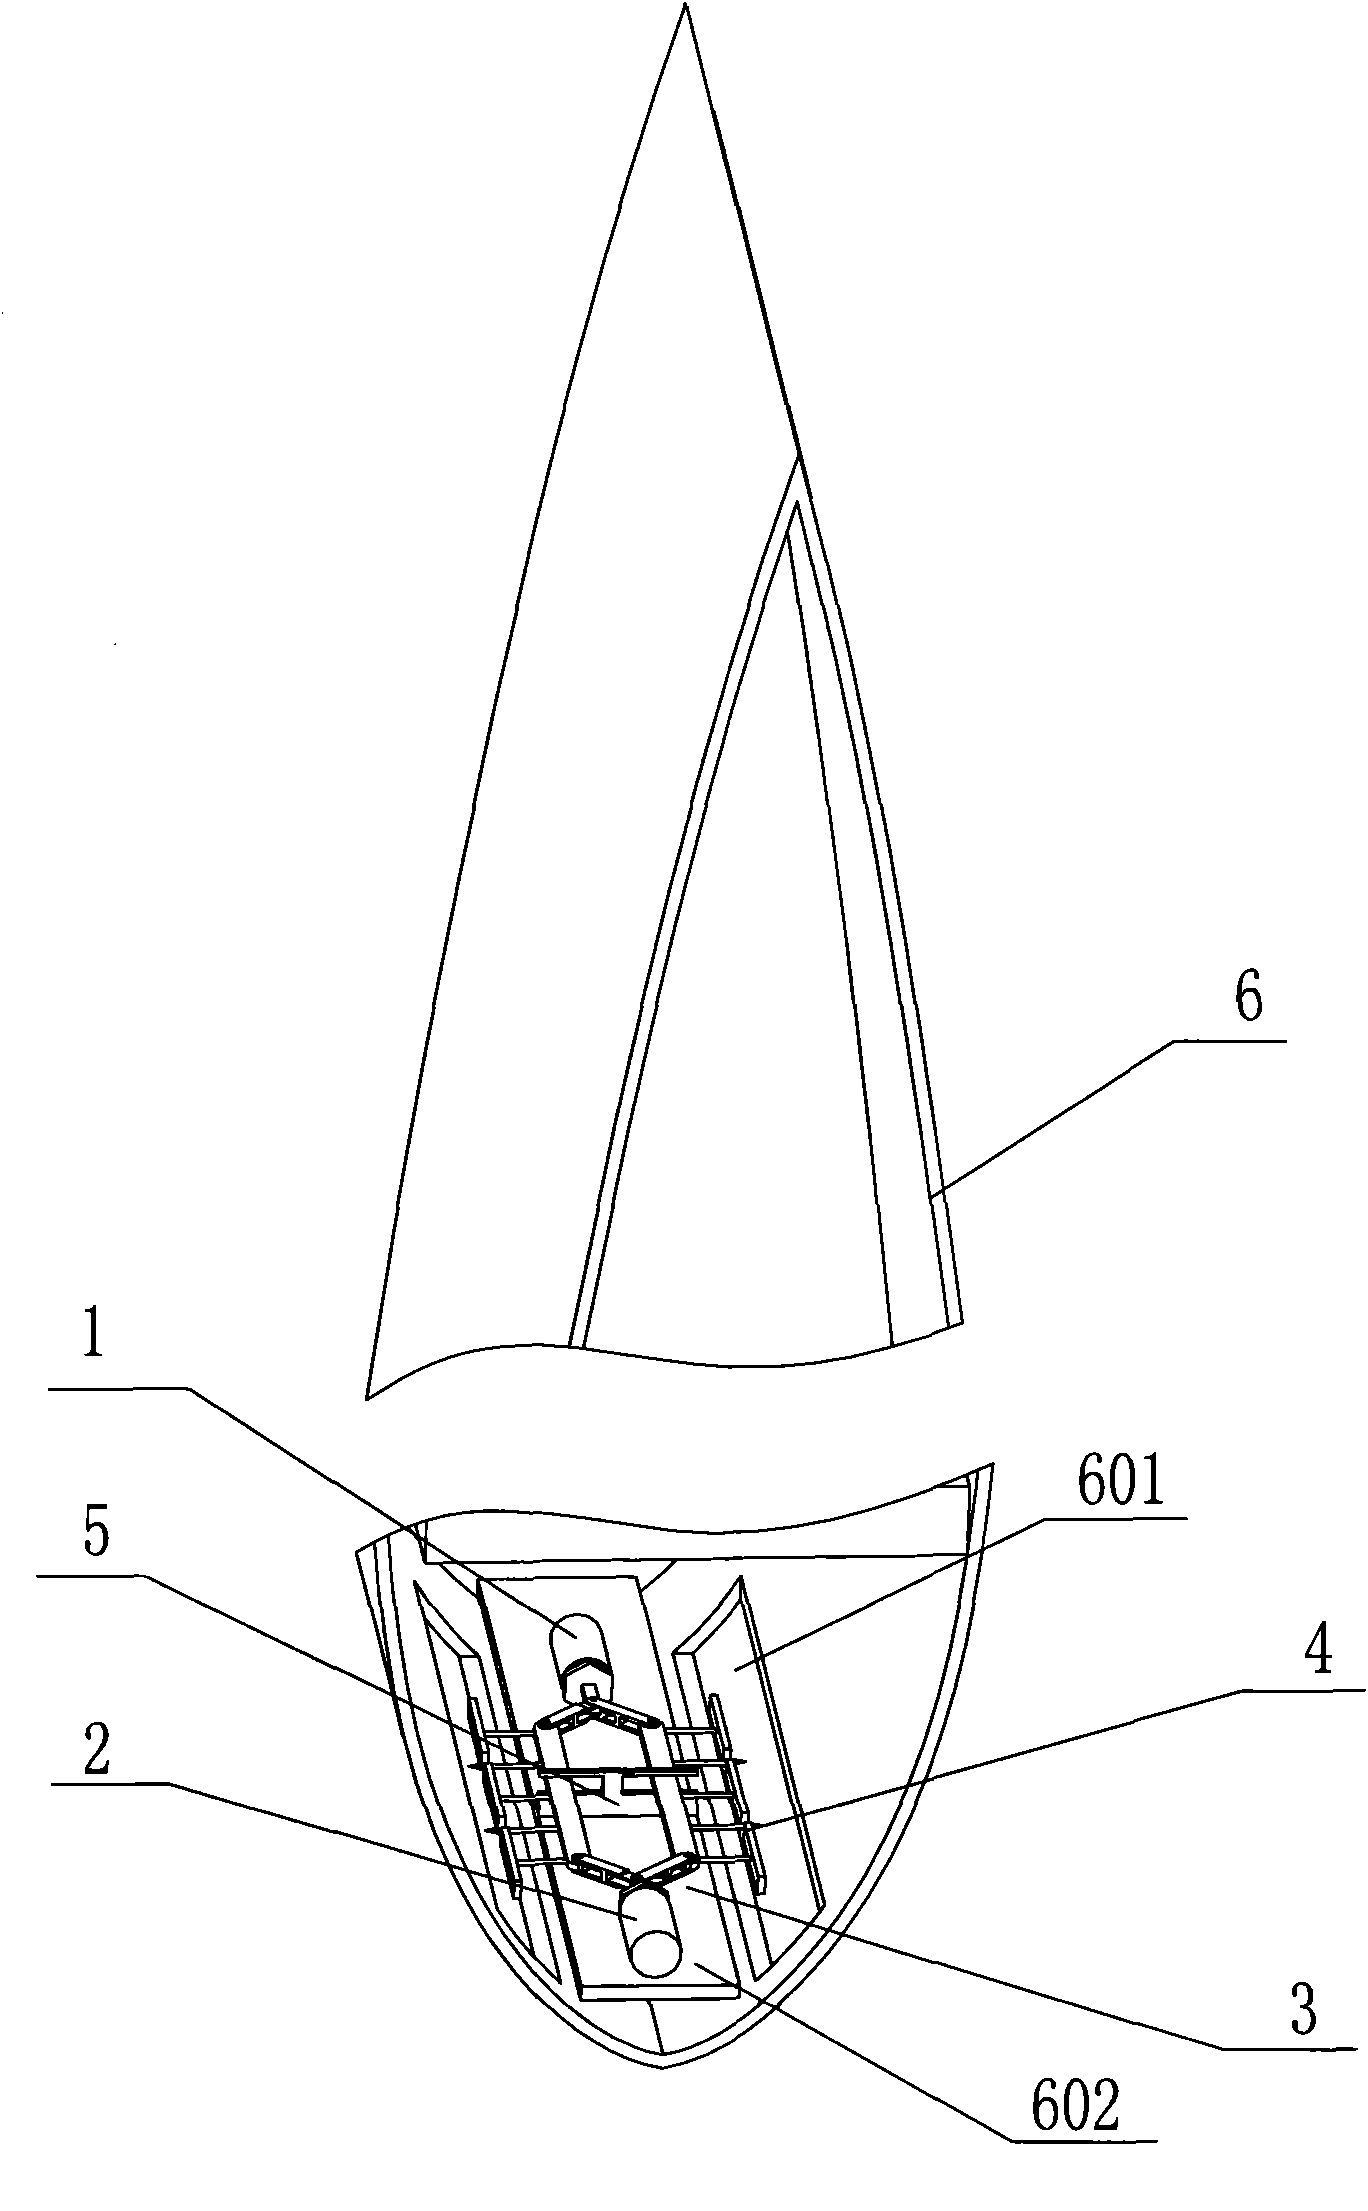 Anti-blockage device for slots on blades of wind motor